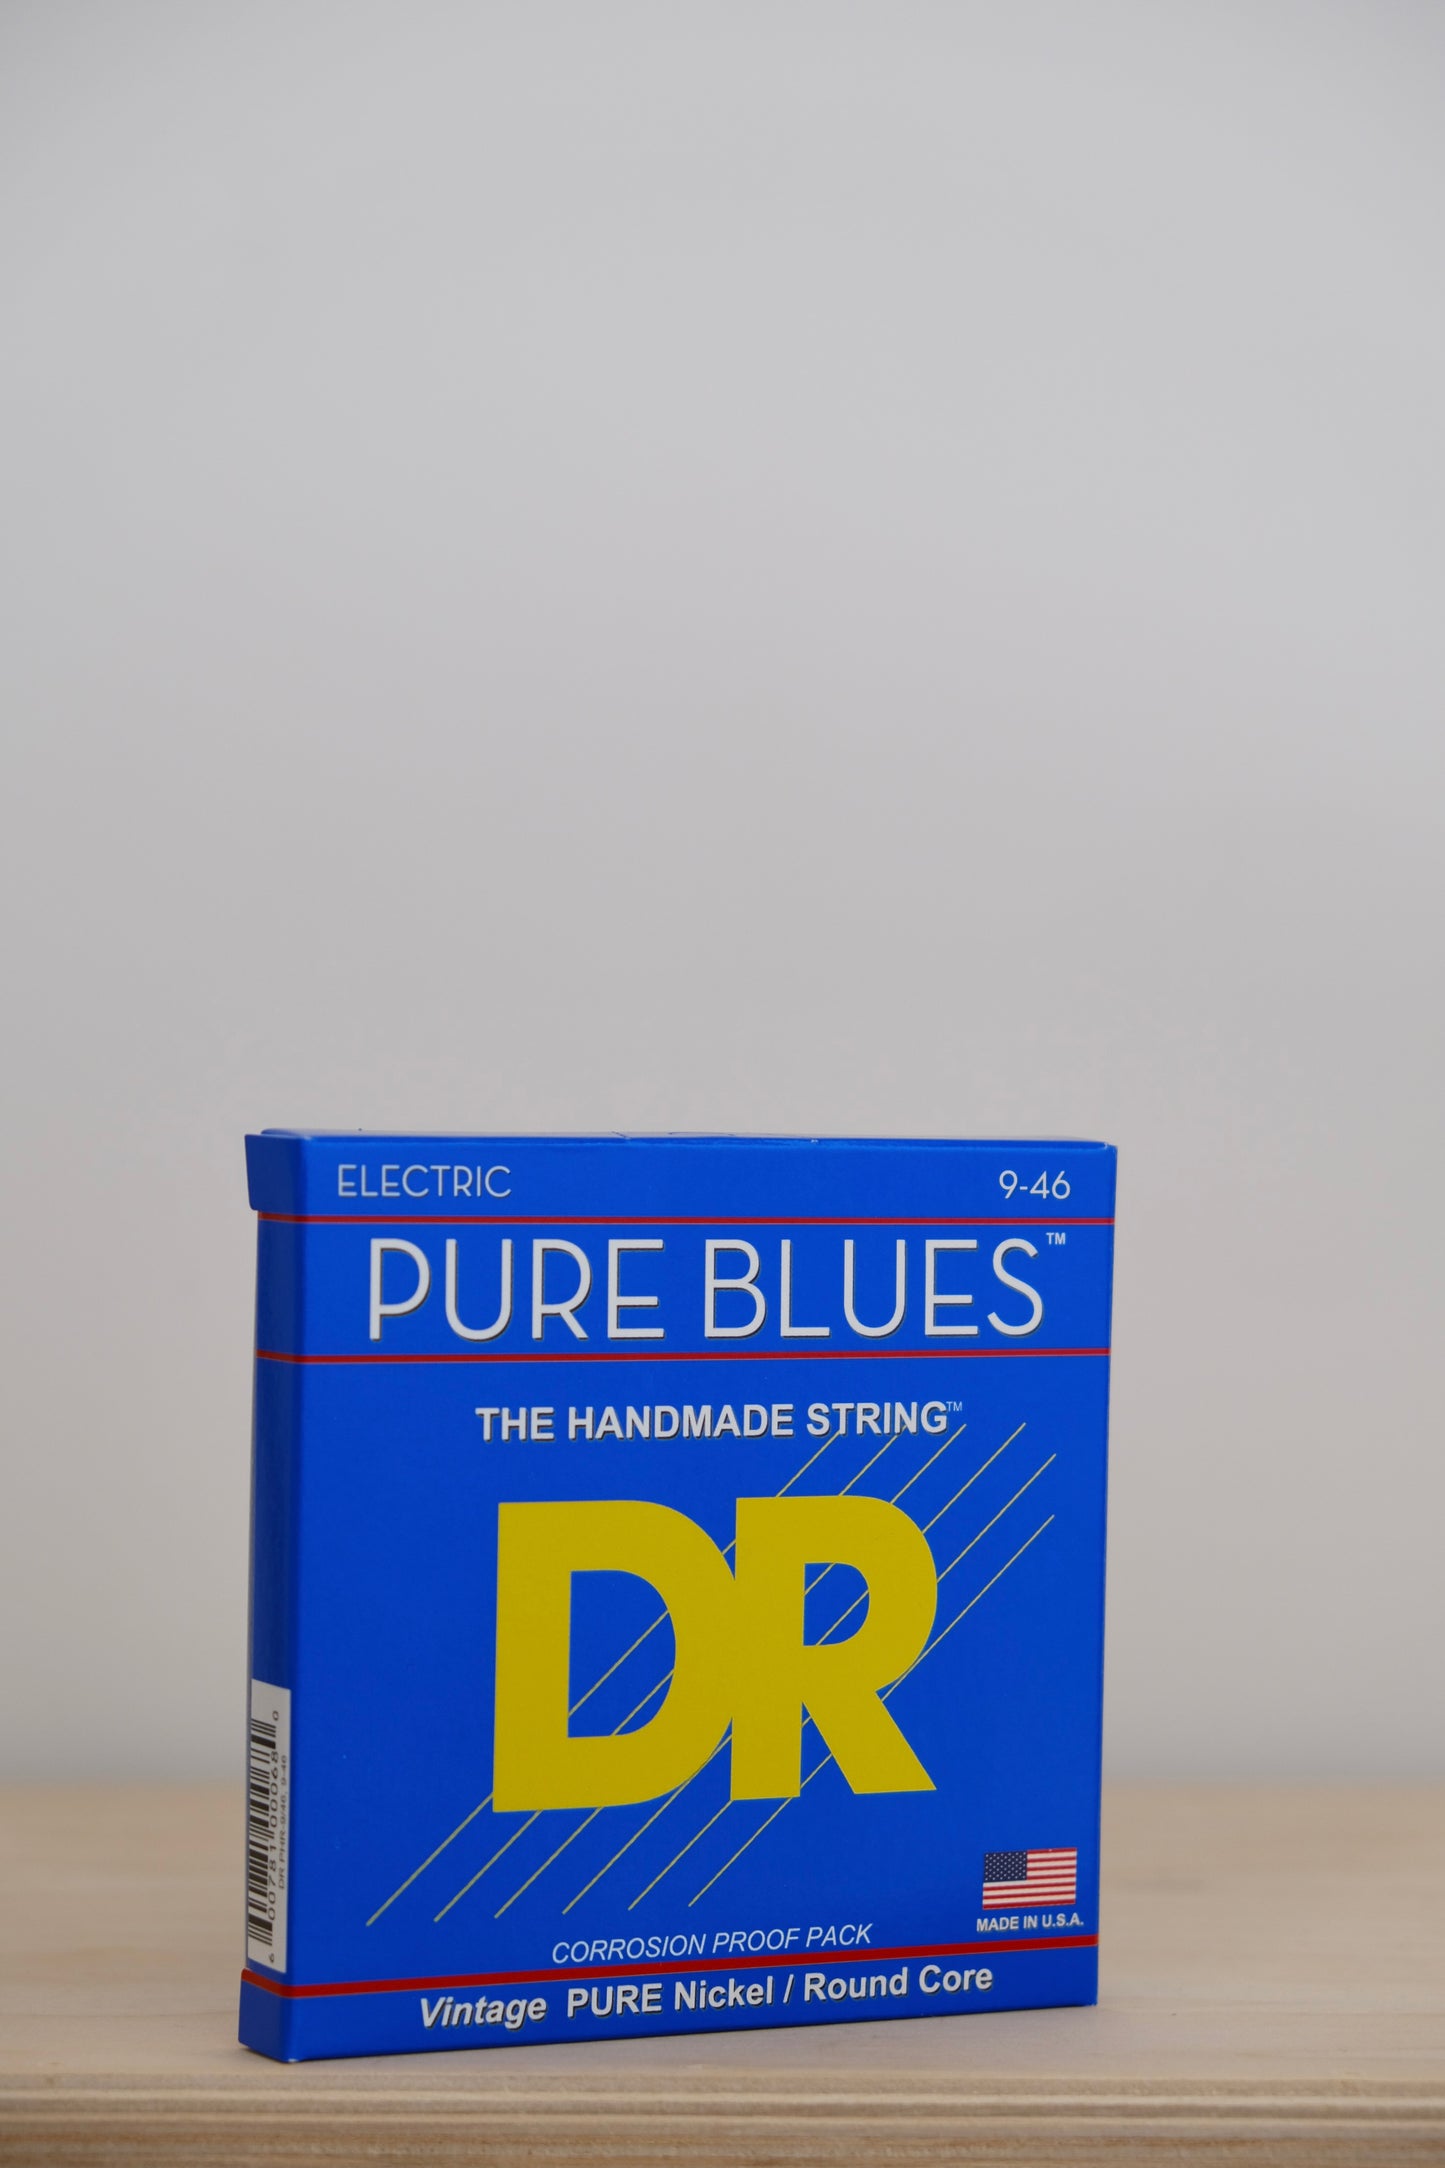 DR PURE BLUES™ - Pure Nickel Electric Guitar Strings: Light to Medium 9-46